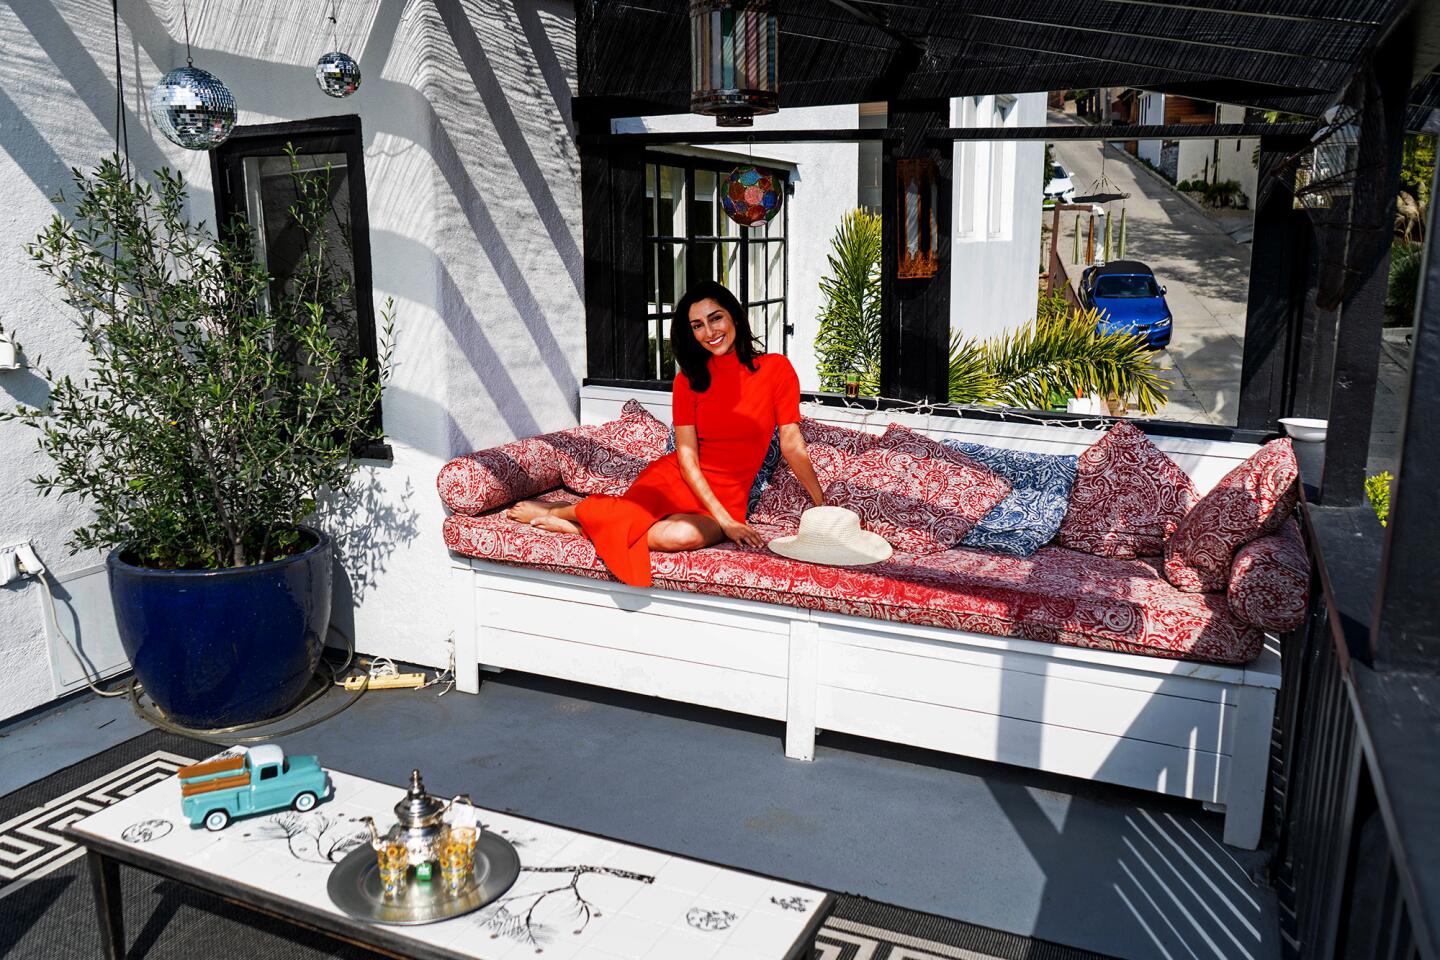 Actress Necar Zadegan on the balcony of her Hollywood Hills home.